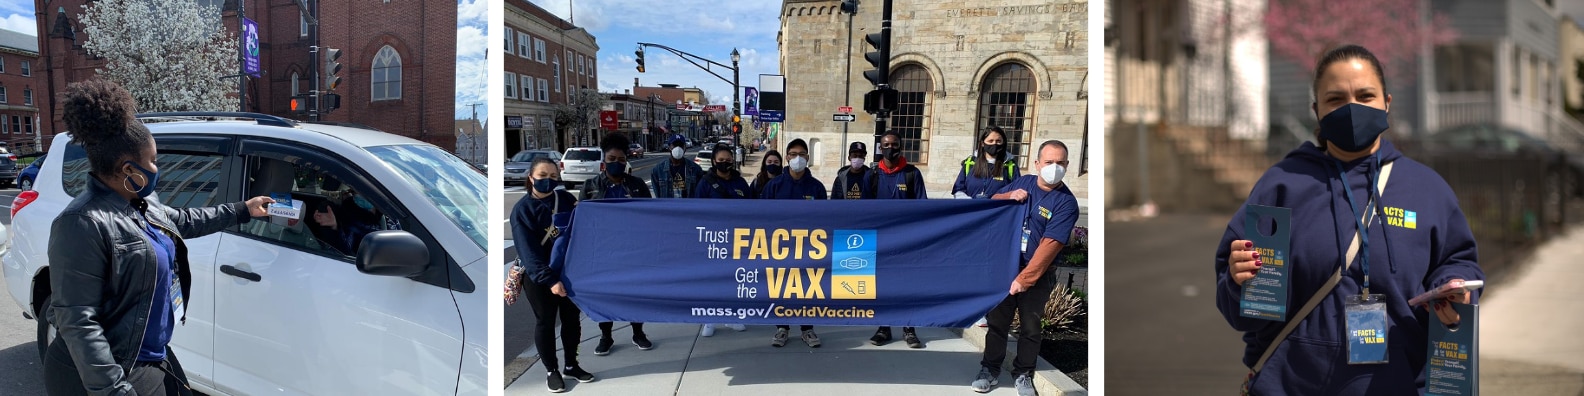 Staff canvassing for the Vaccine Equity Initiative